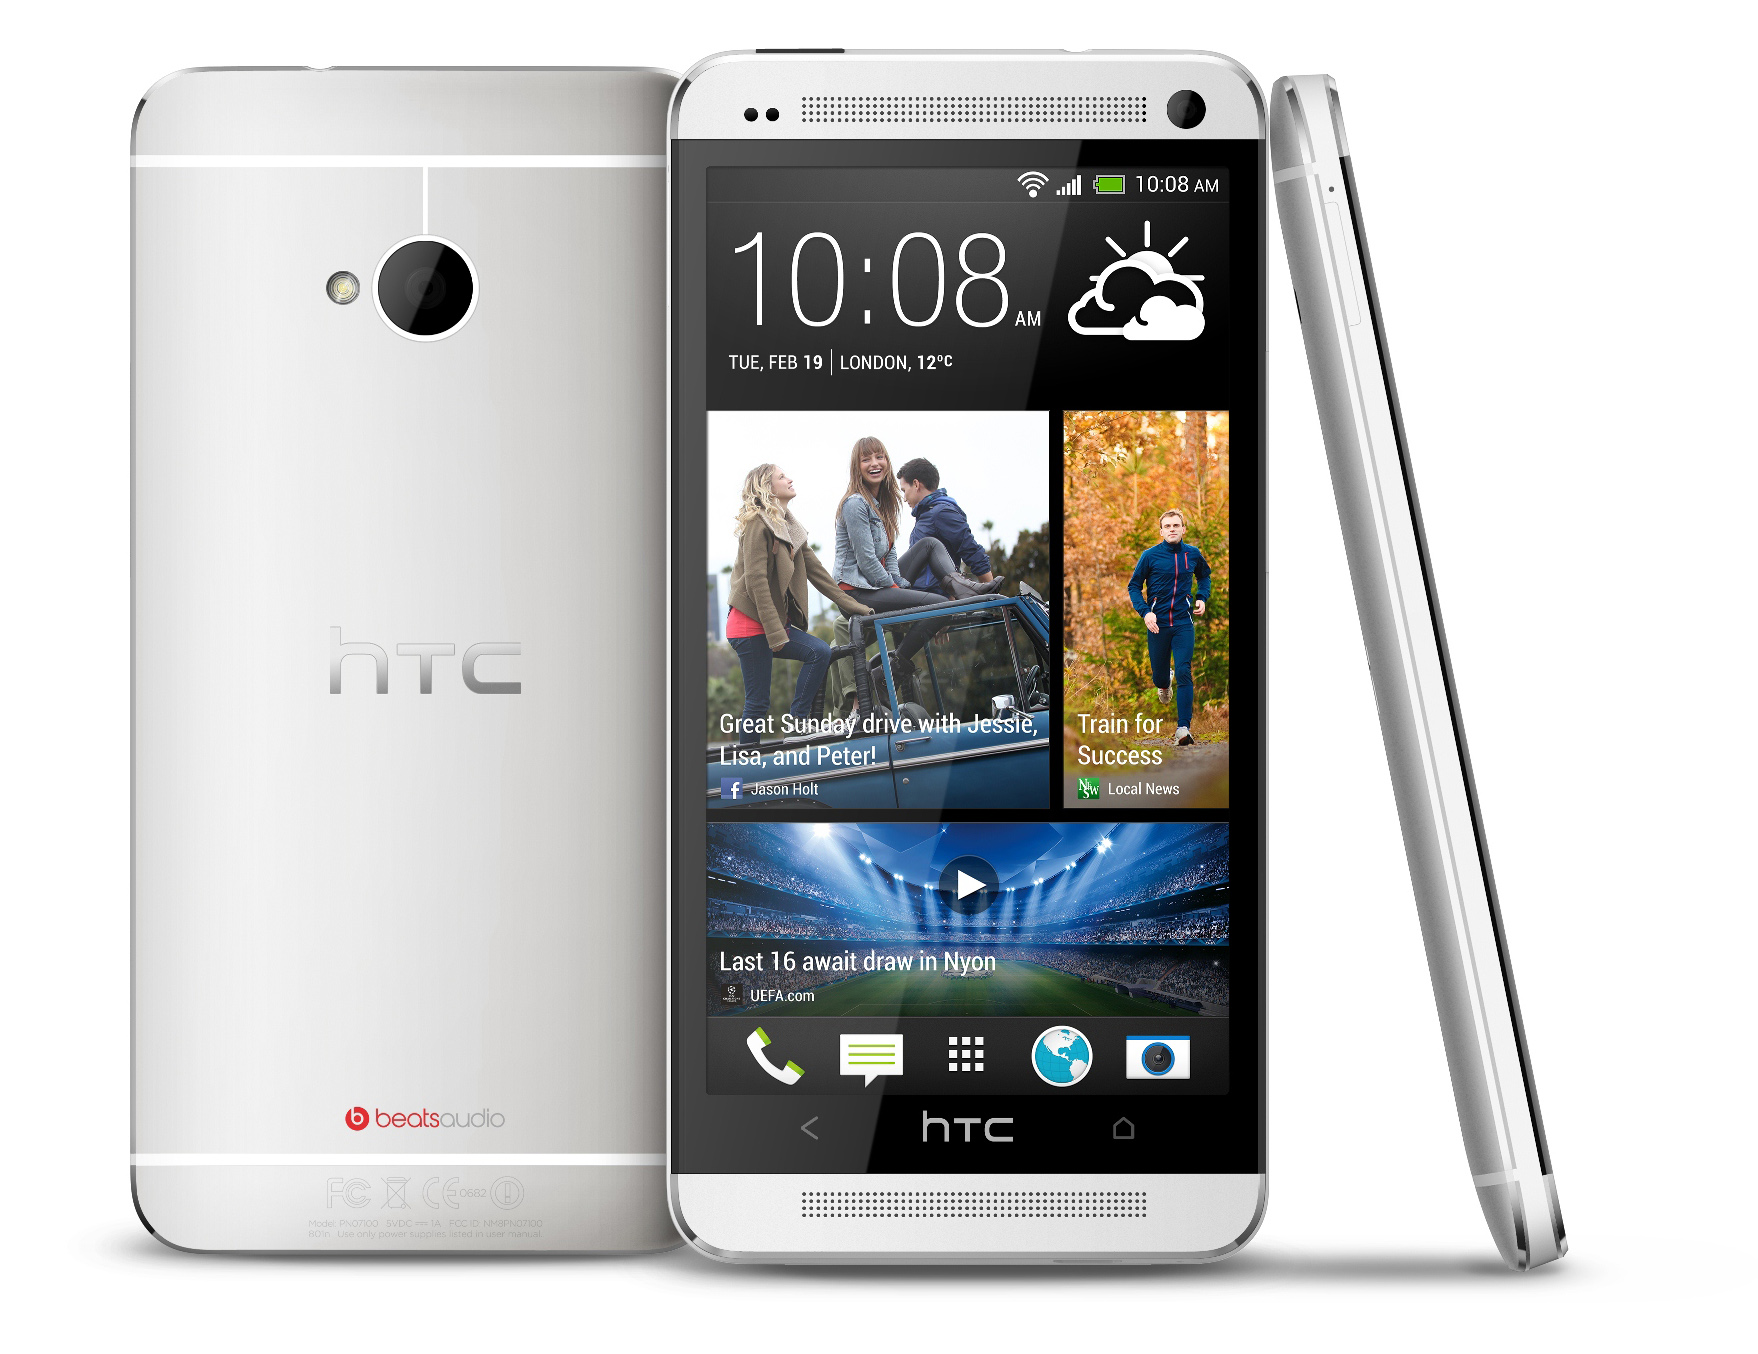 The Best Features Found on the New HTC One Smartphone